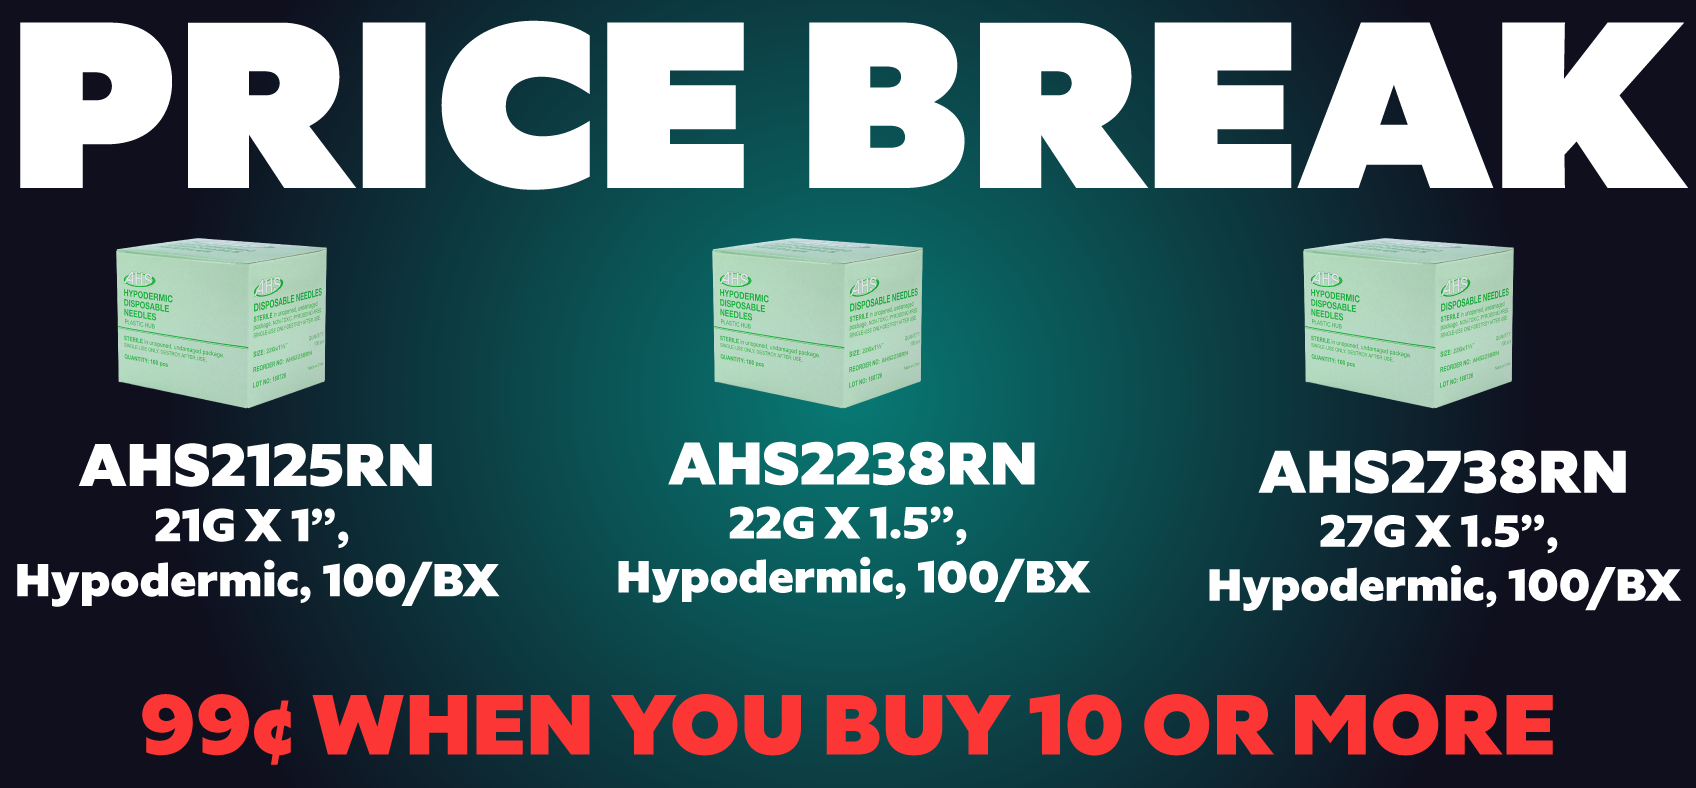 Price Break When You Buy 10 or More